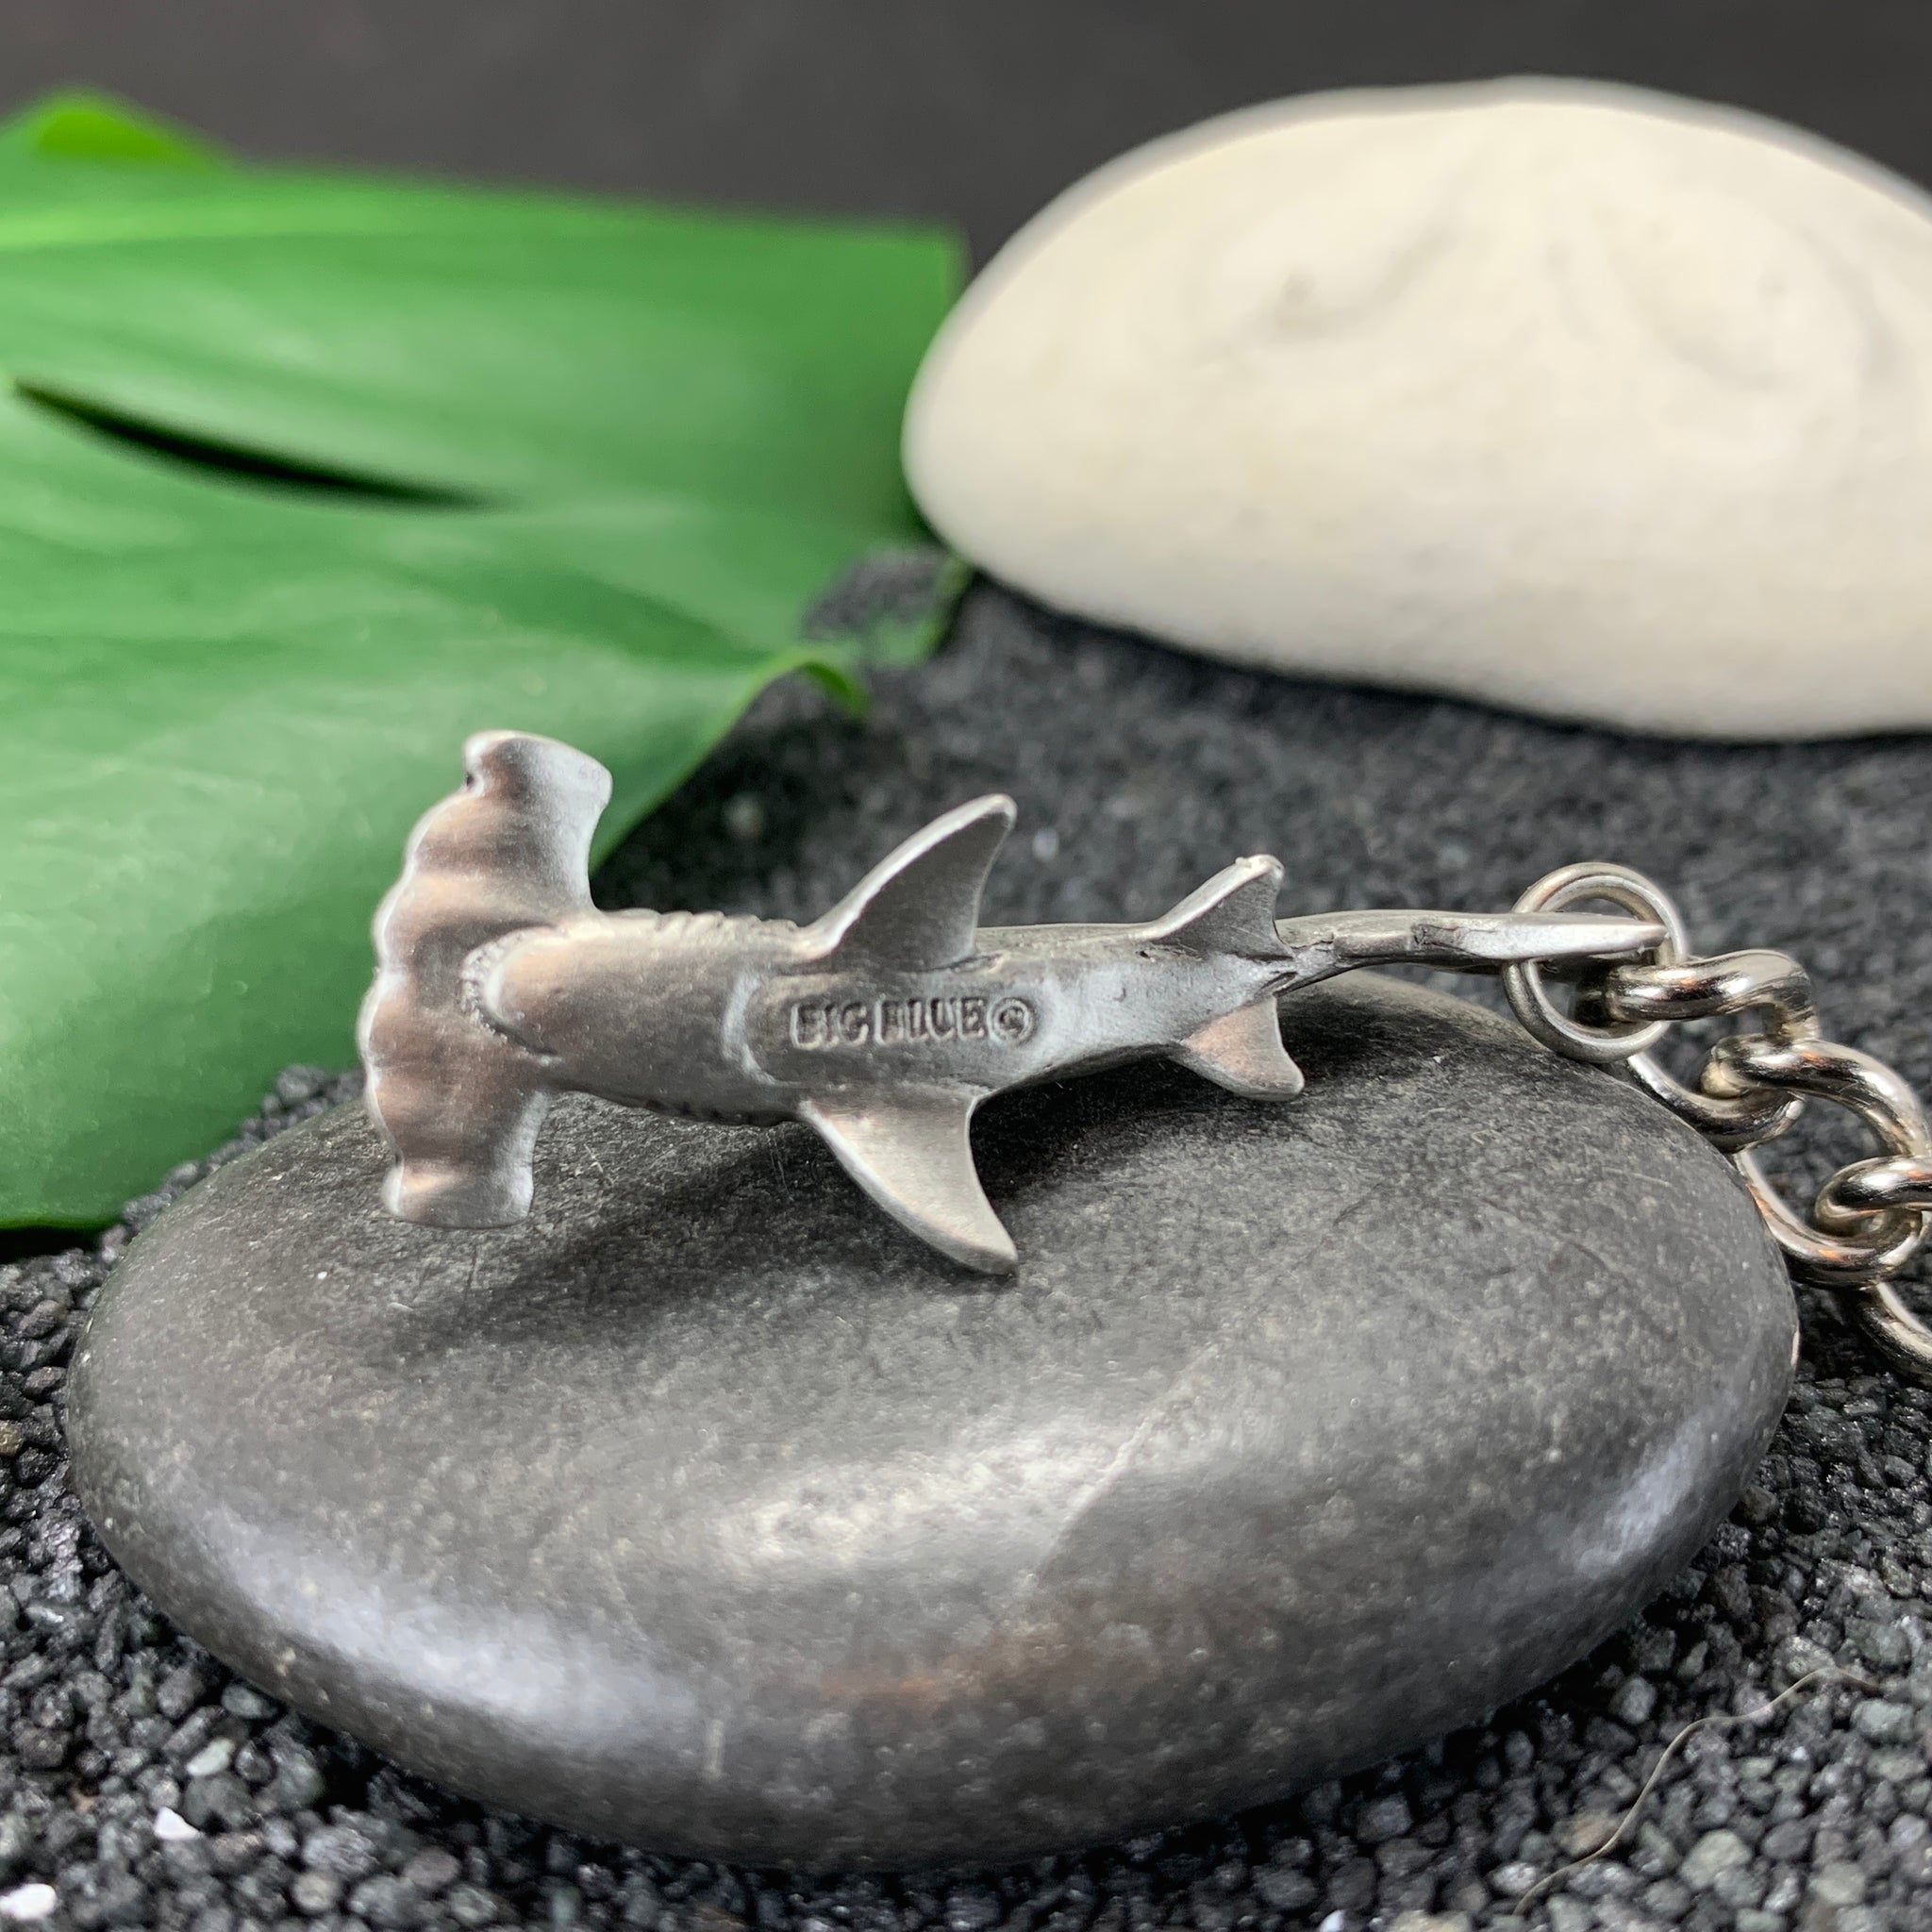 America Strong - Pewter Hammered Keychain - USA Made